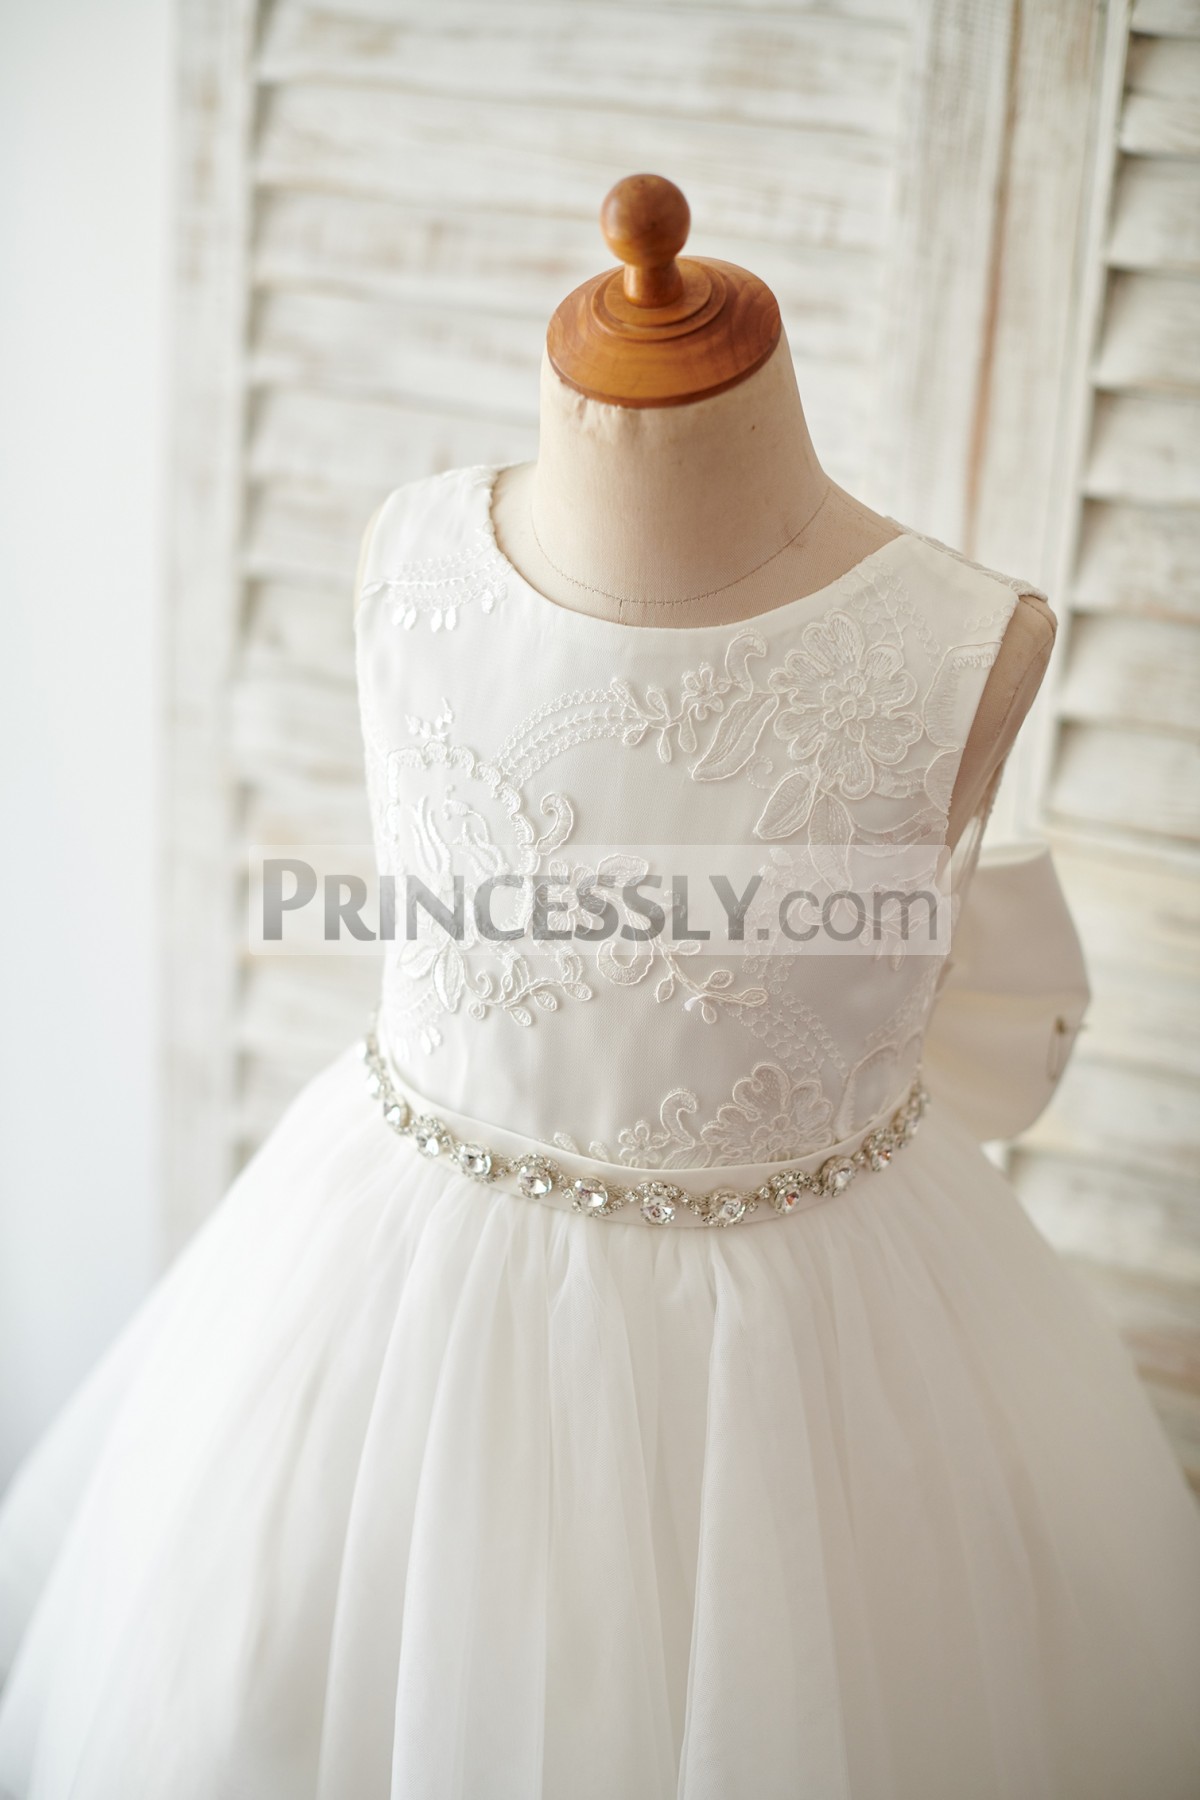 Scoop Neck Sleeveless Lace Bodice with Crystals Belt